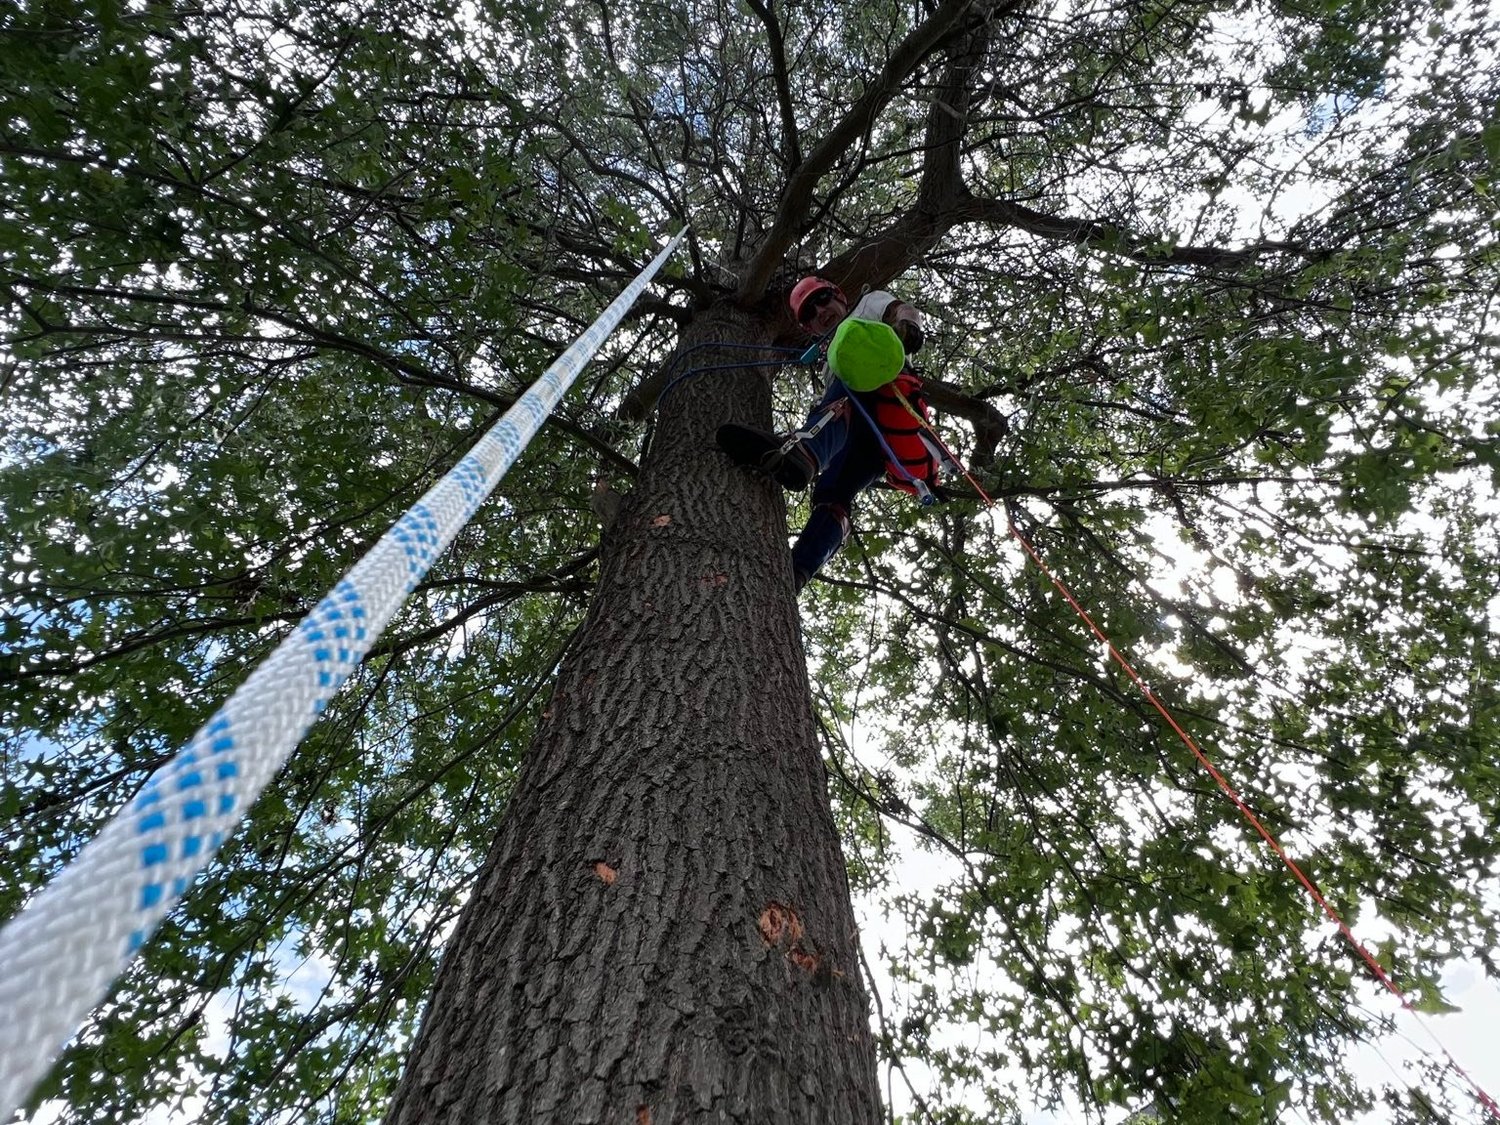 Freeworker Blog » The splice, the safe end of the tree climbing rope